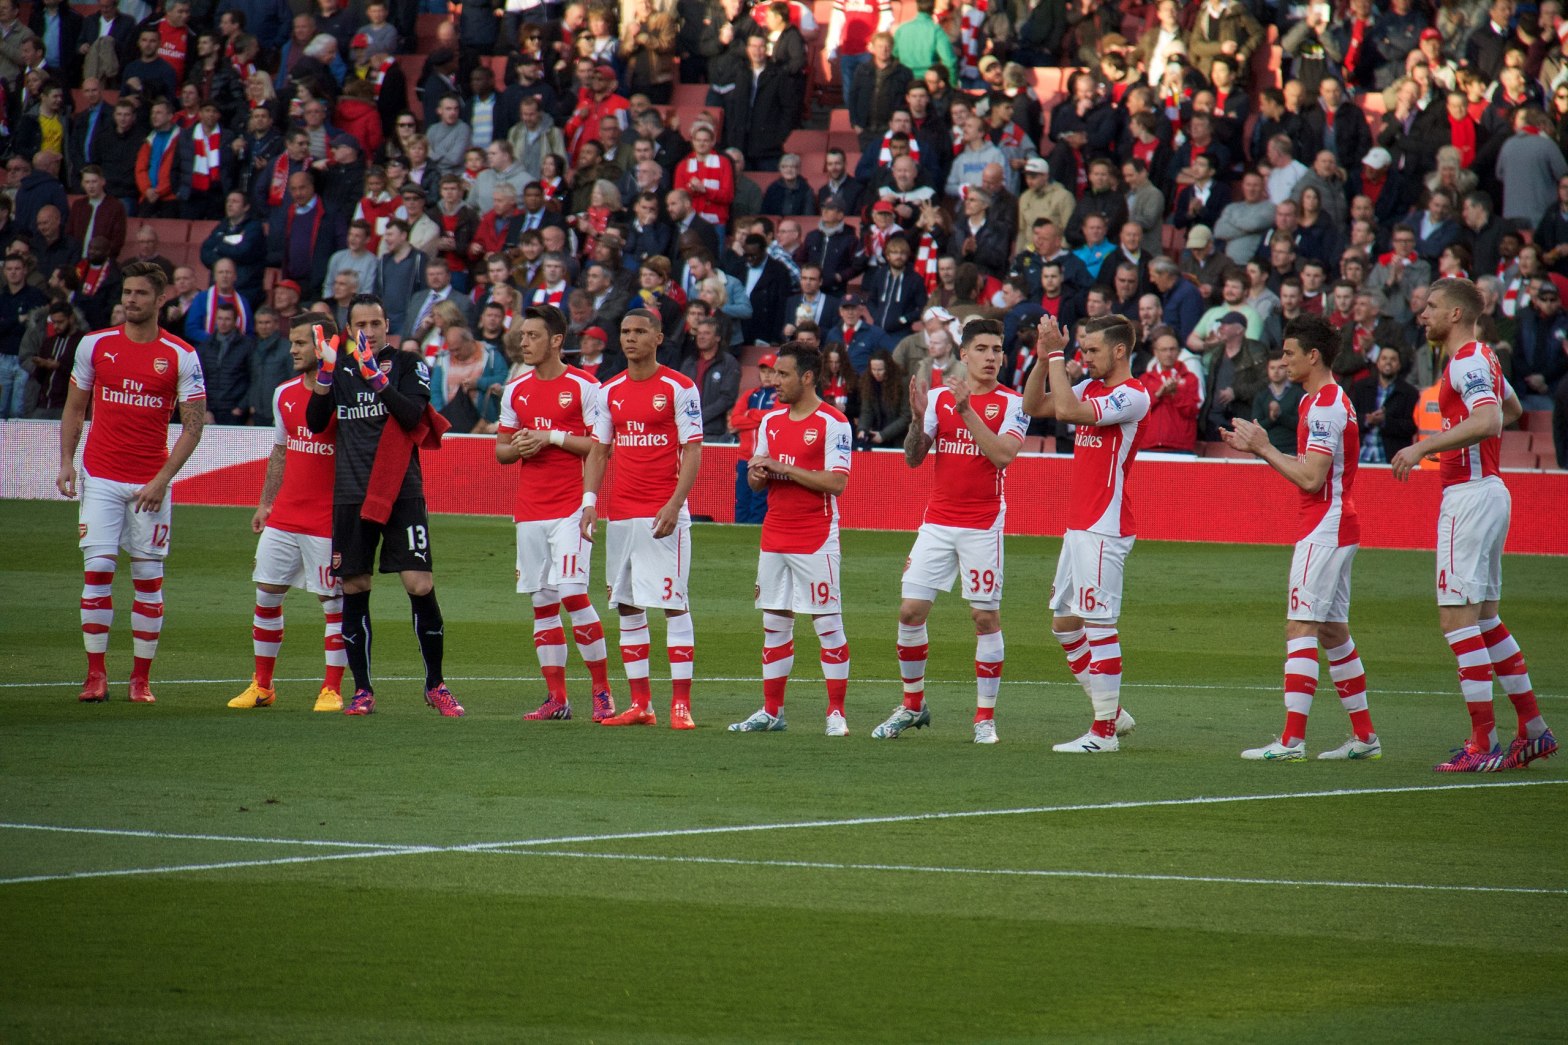 Arsenal applaud their fans